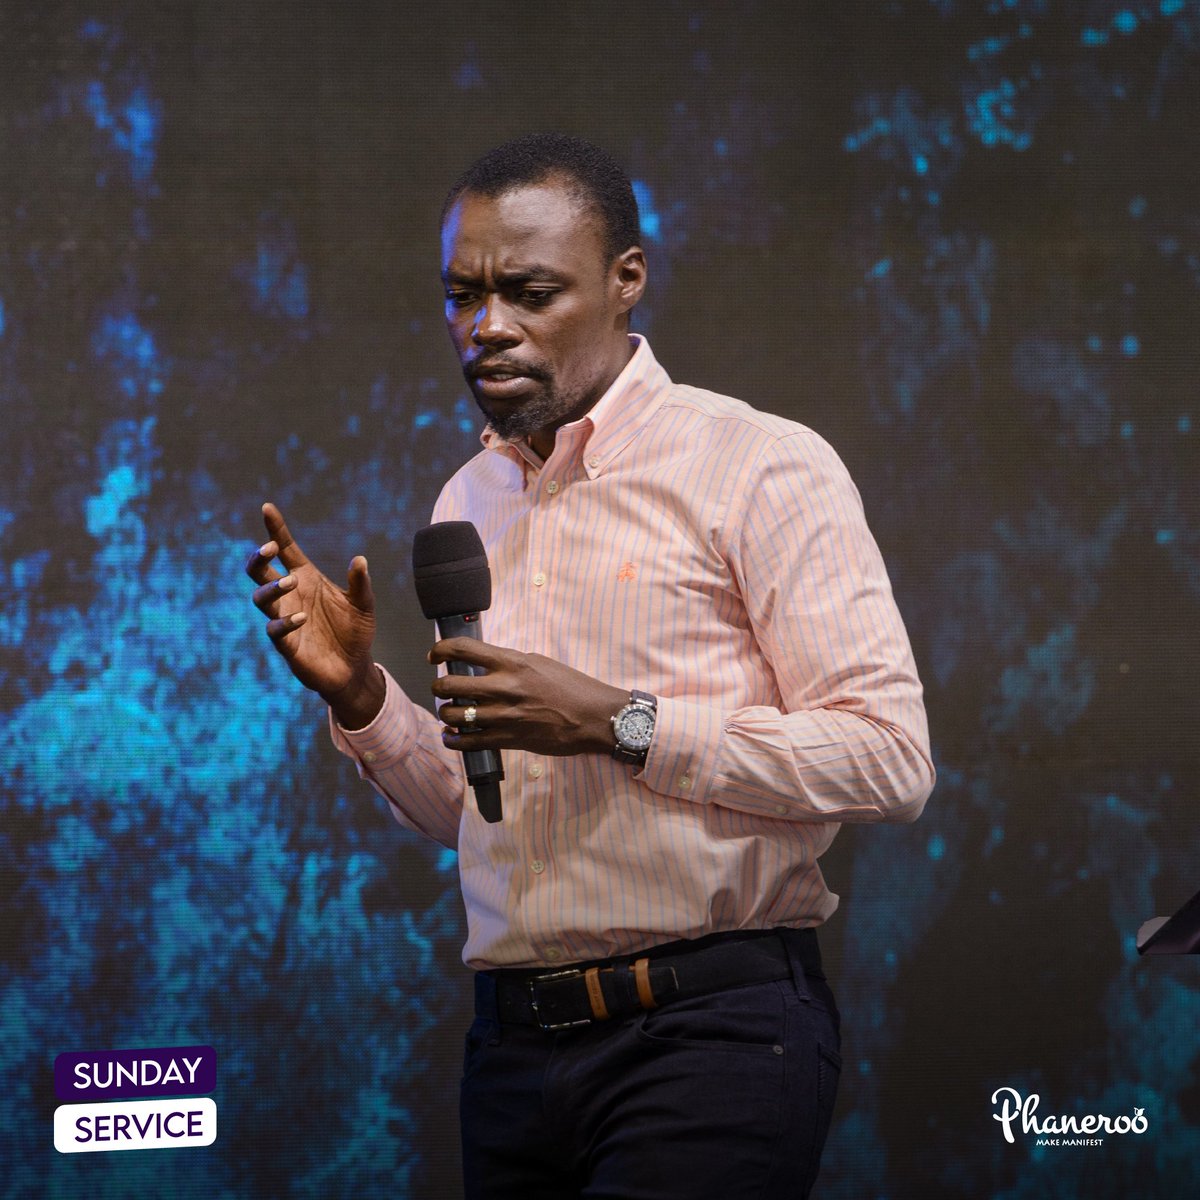 The heart is the ground into which the seed of the Word of God is planted. The state of your heart will determine how you receive the Word and the nature of fruit that will spring forth from the Word you received. SELAH! bit.ly/PhanerooSunday… #PhanerooSundayService #LiveNow